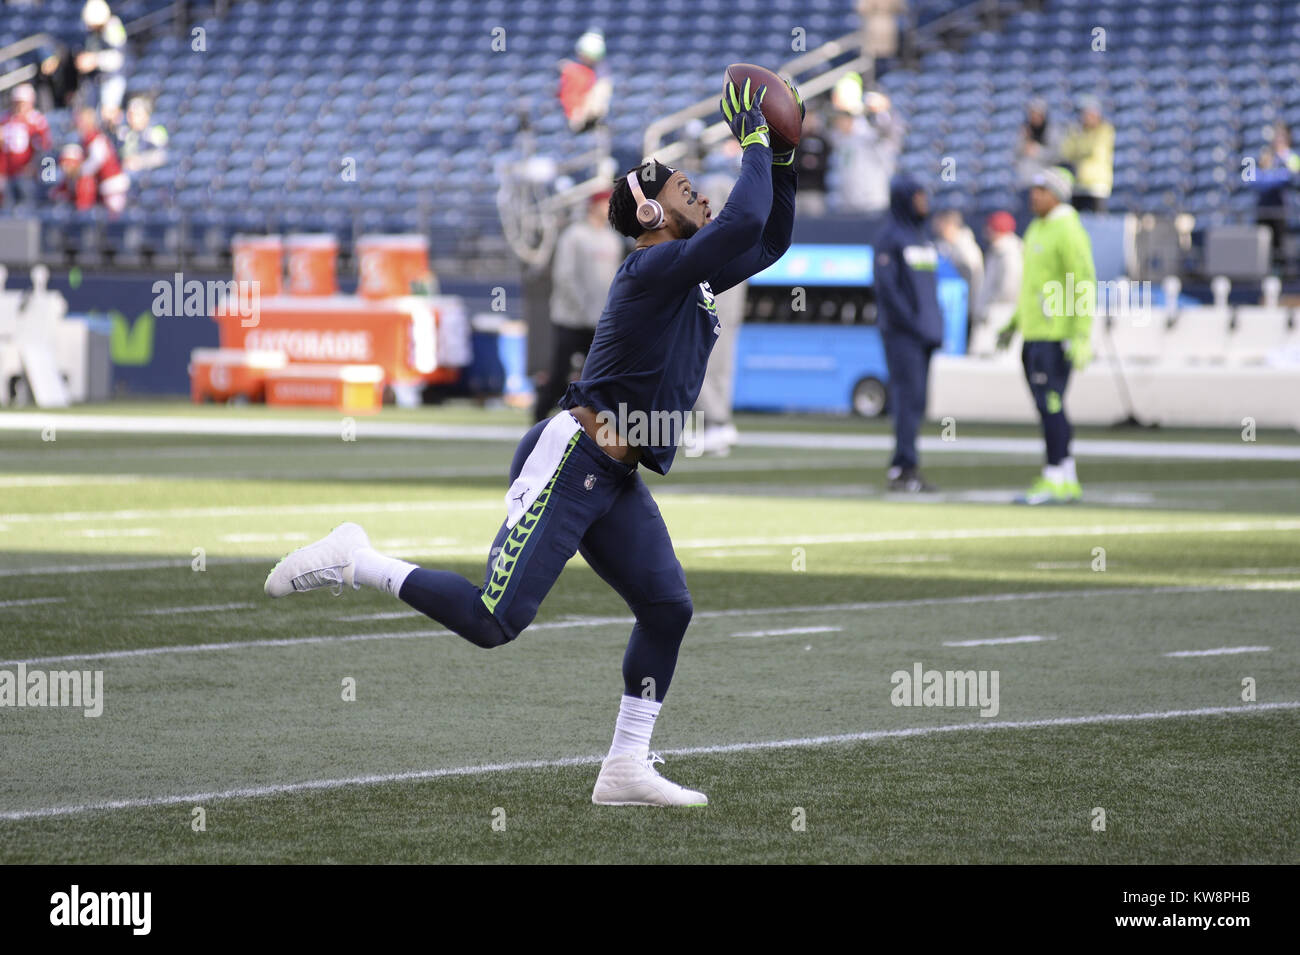 Seattle, Washington, USA. 31st Dec, 2017. Seahawks safety EARL THOMAS III warms up pre-game as the Arizona Cardinals and Seattle Seahawks get ready to play an NFL game at Century Link Field in Seattle, WA. Credit: Jeff Halstead/ZUMA Wire/Alamy Live News Stock Photo